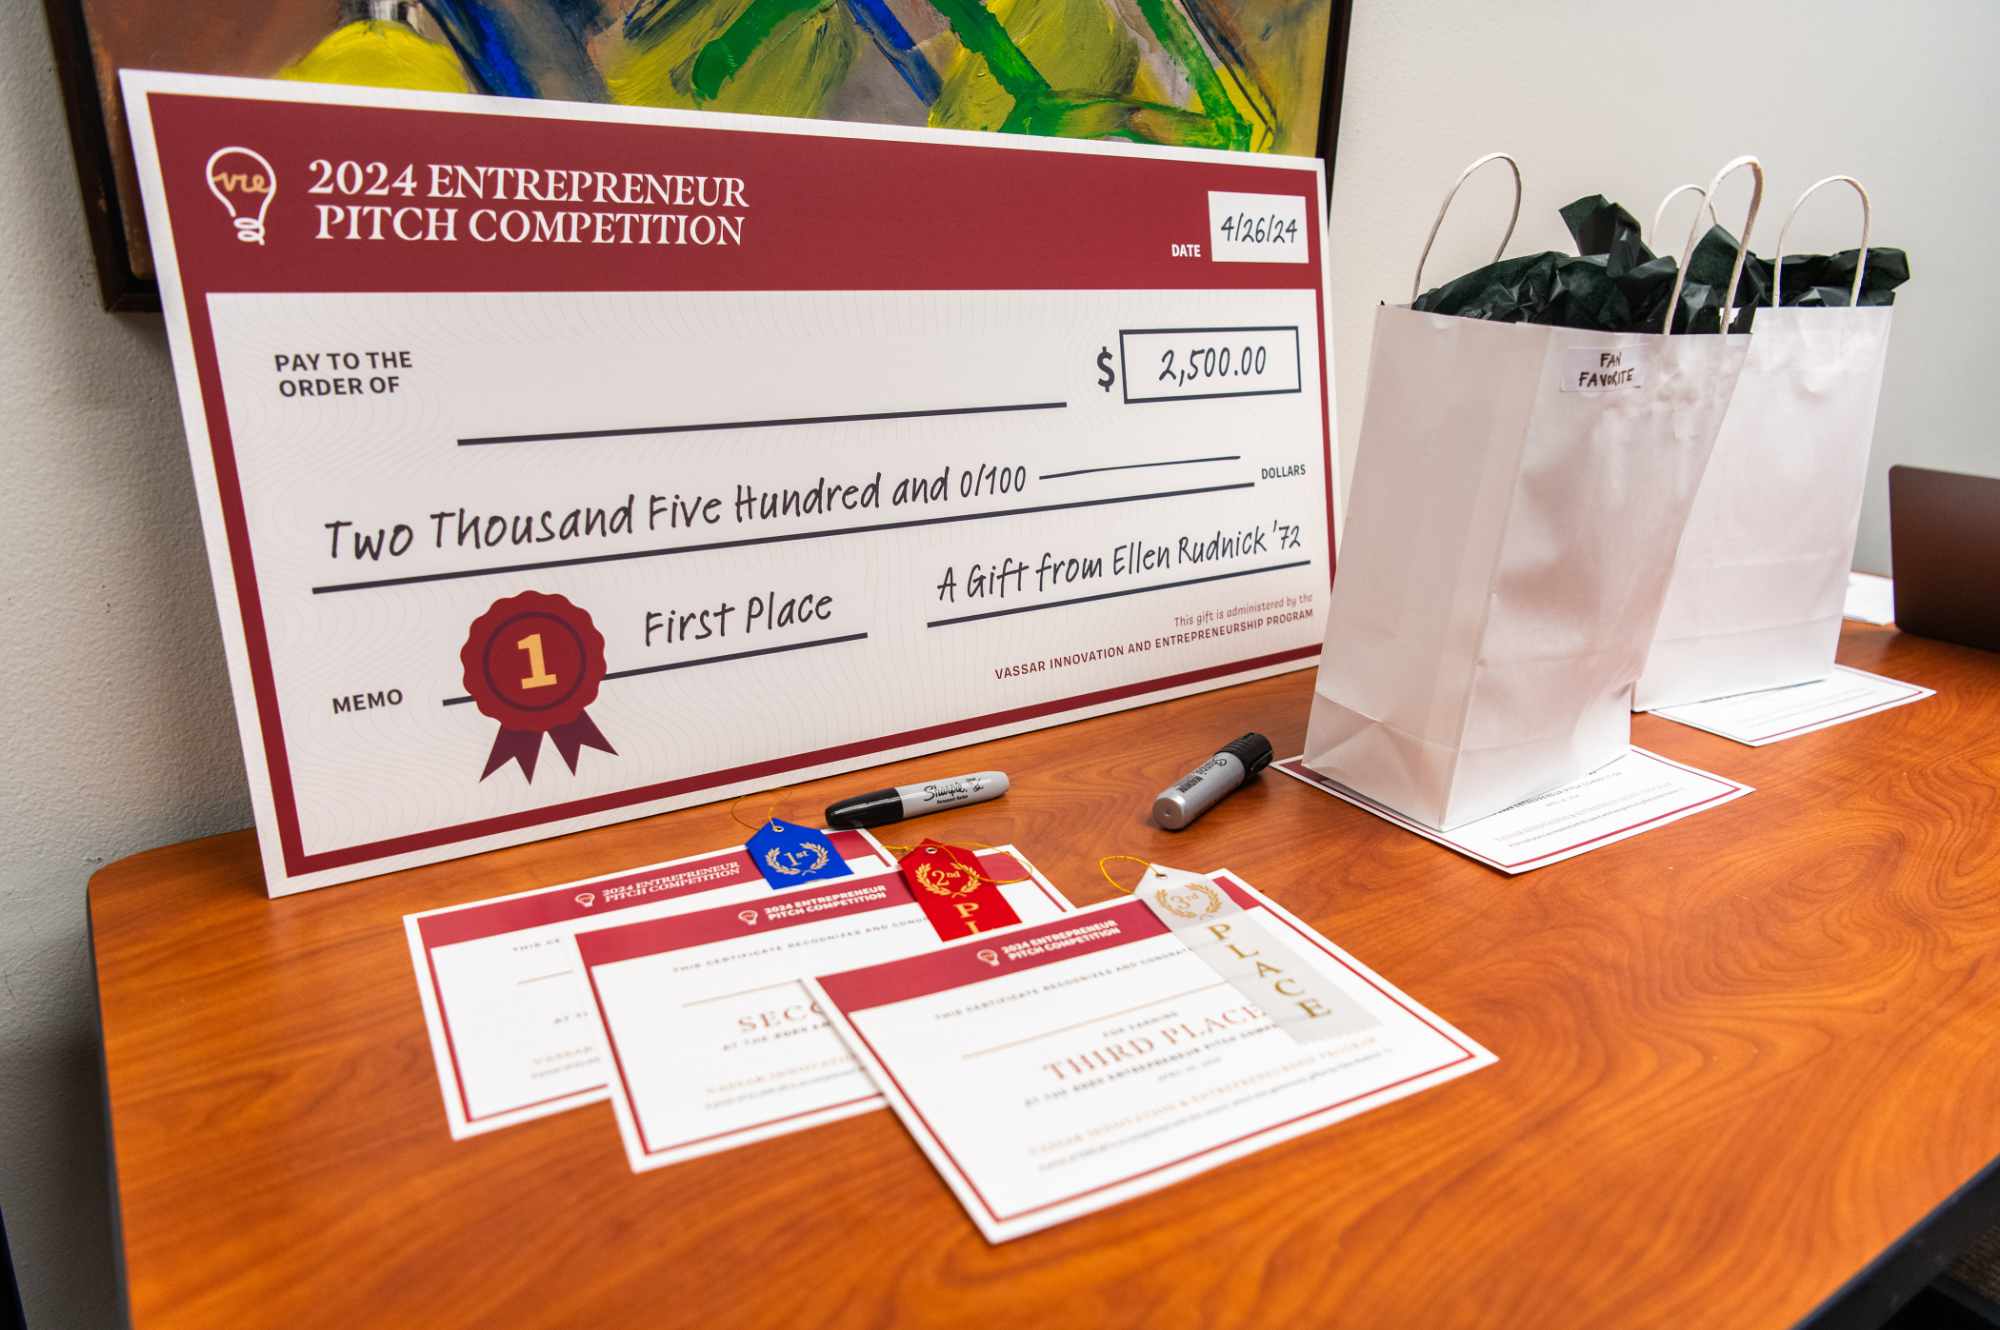 A large poster-sized check on a wooden table, with signup forms near it. Printed on the check is the text “2024 Entrepreneur Pitch Competition. First Place, Two Thousand Five Hundred Dollars. A Gift From Ellen Rudnick ’72”.